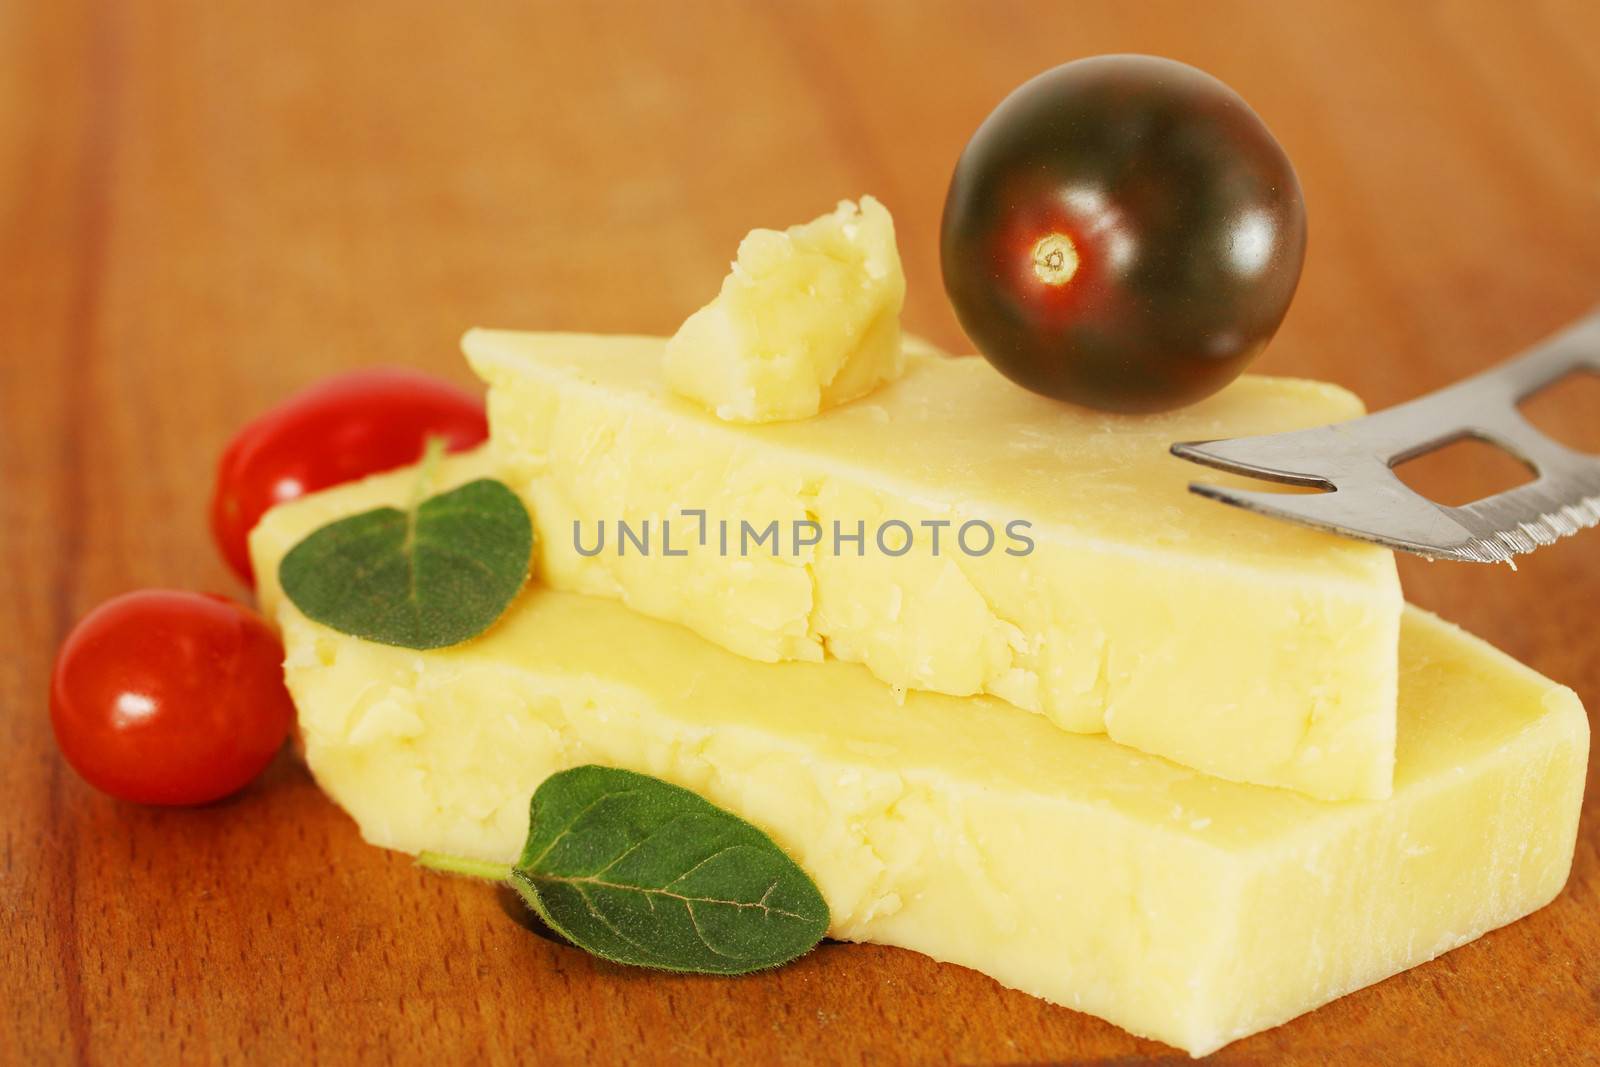 piece of cheese with small tomatoes on a wooden board